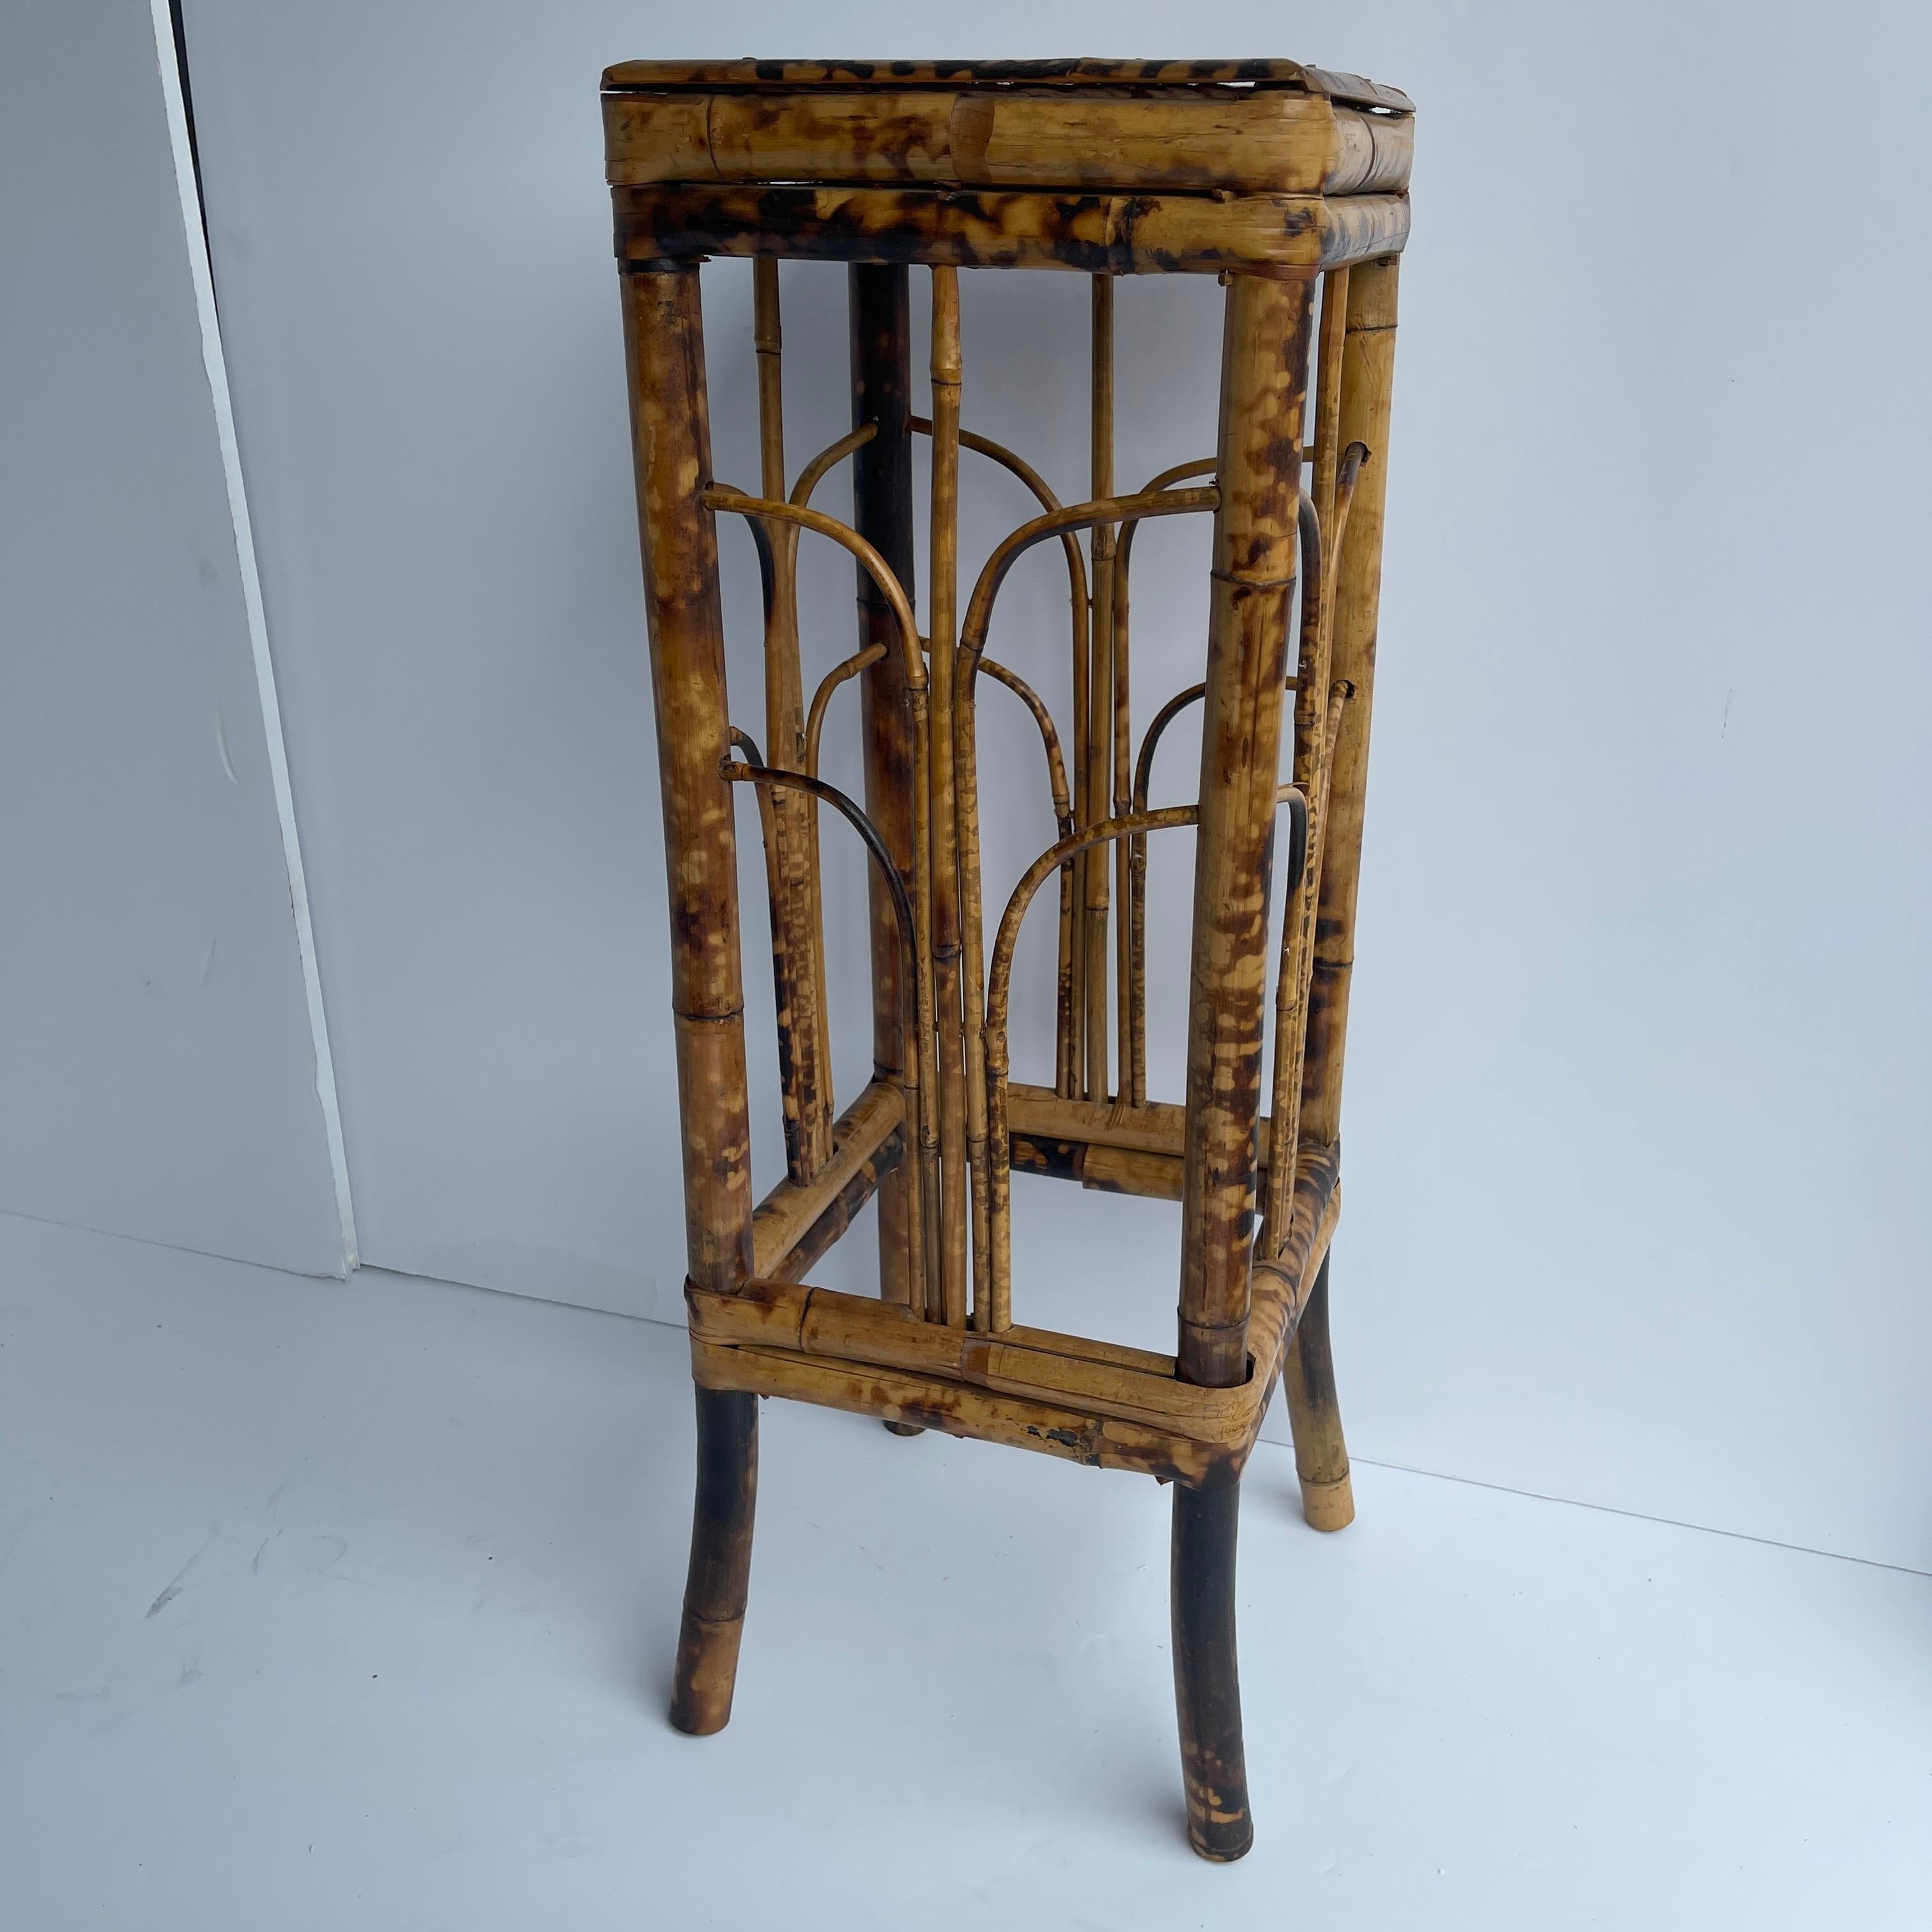 Square Mid-Century Modern bamboo rattan plant stand.
This sweet small square bamboo plant stand is sitting pretty with it's slightly flared legs and delicate decorative side panels. Sturdy and rich in color, the plant stand also makes a nice